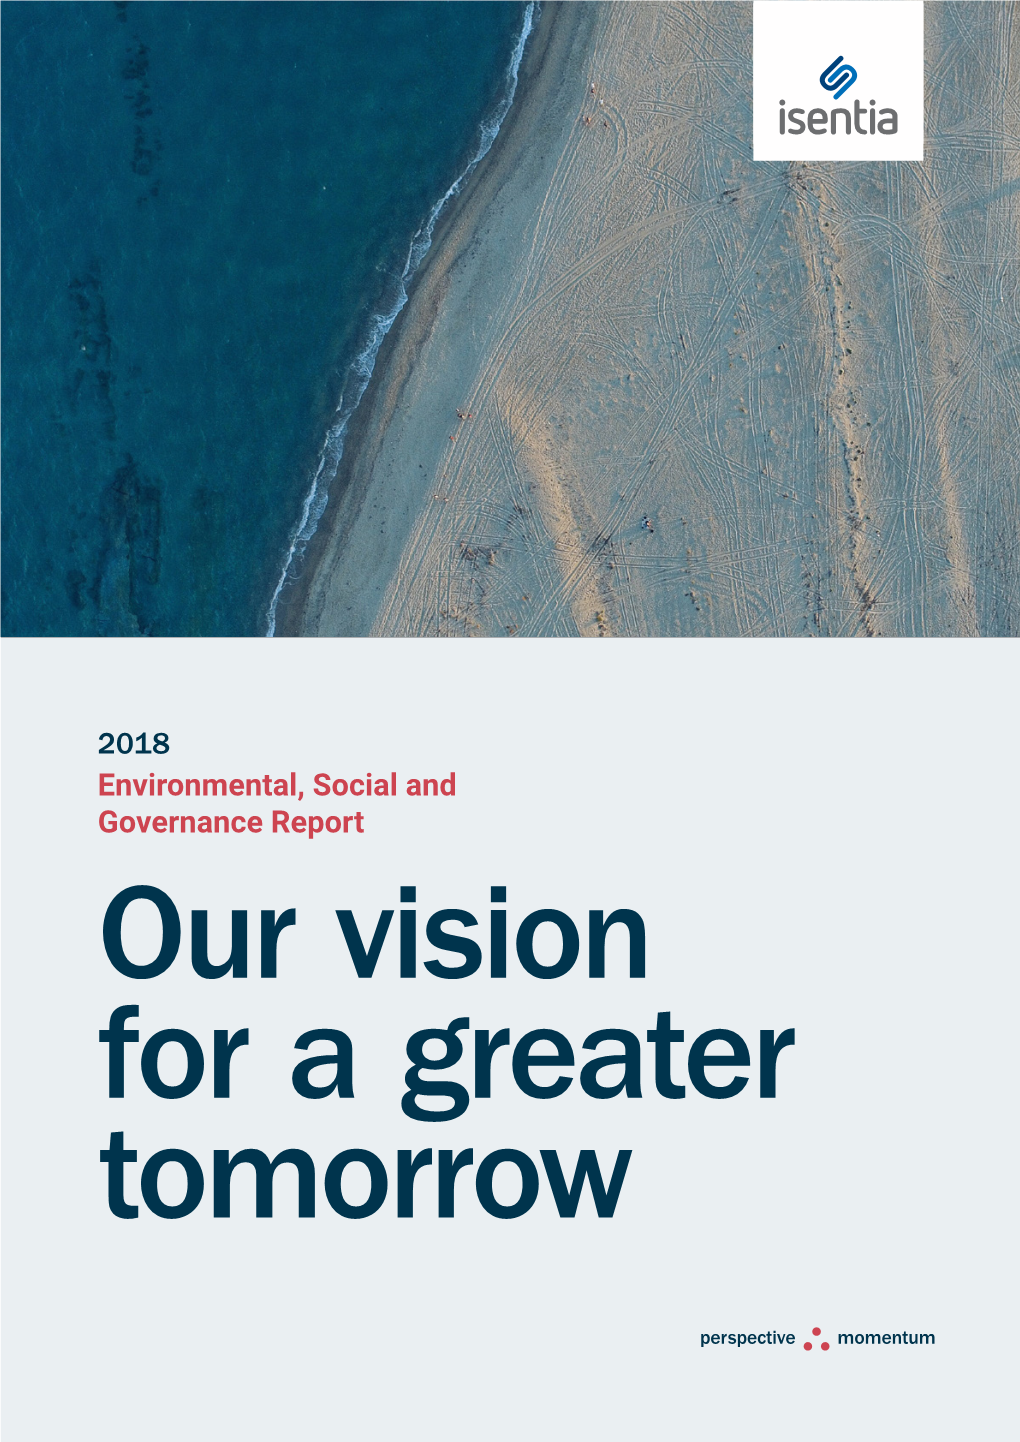 2018 Environmental, Social and Governance Report Our Vision for a Greater Tomorrow 2018 Environmental, Social and Governance Report 2 Table of Contents